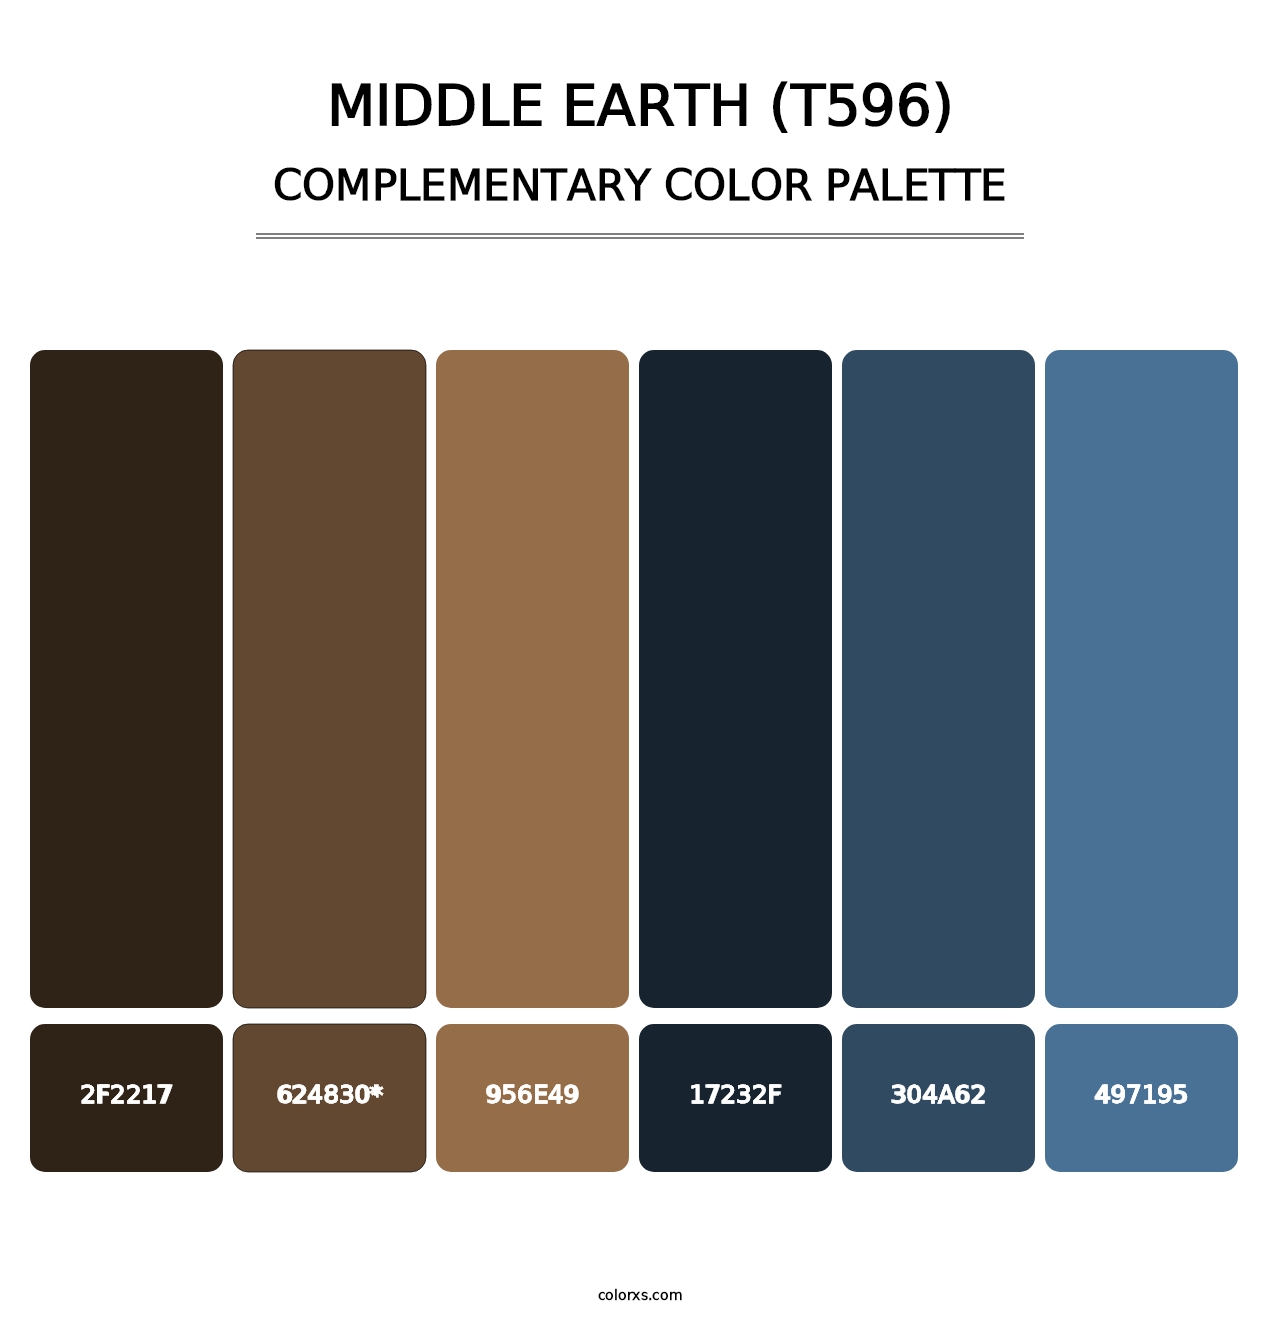 Middle Earth (T596) - Complementary Color Palette